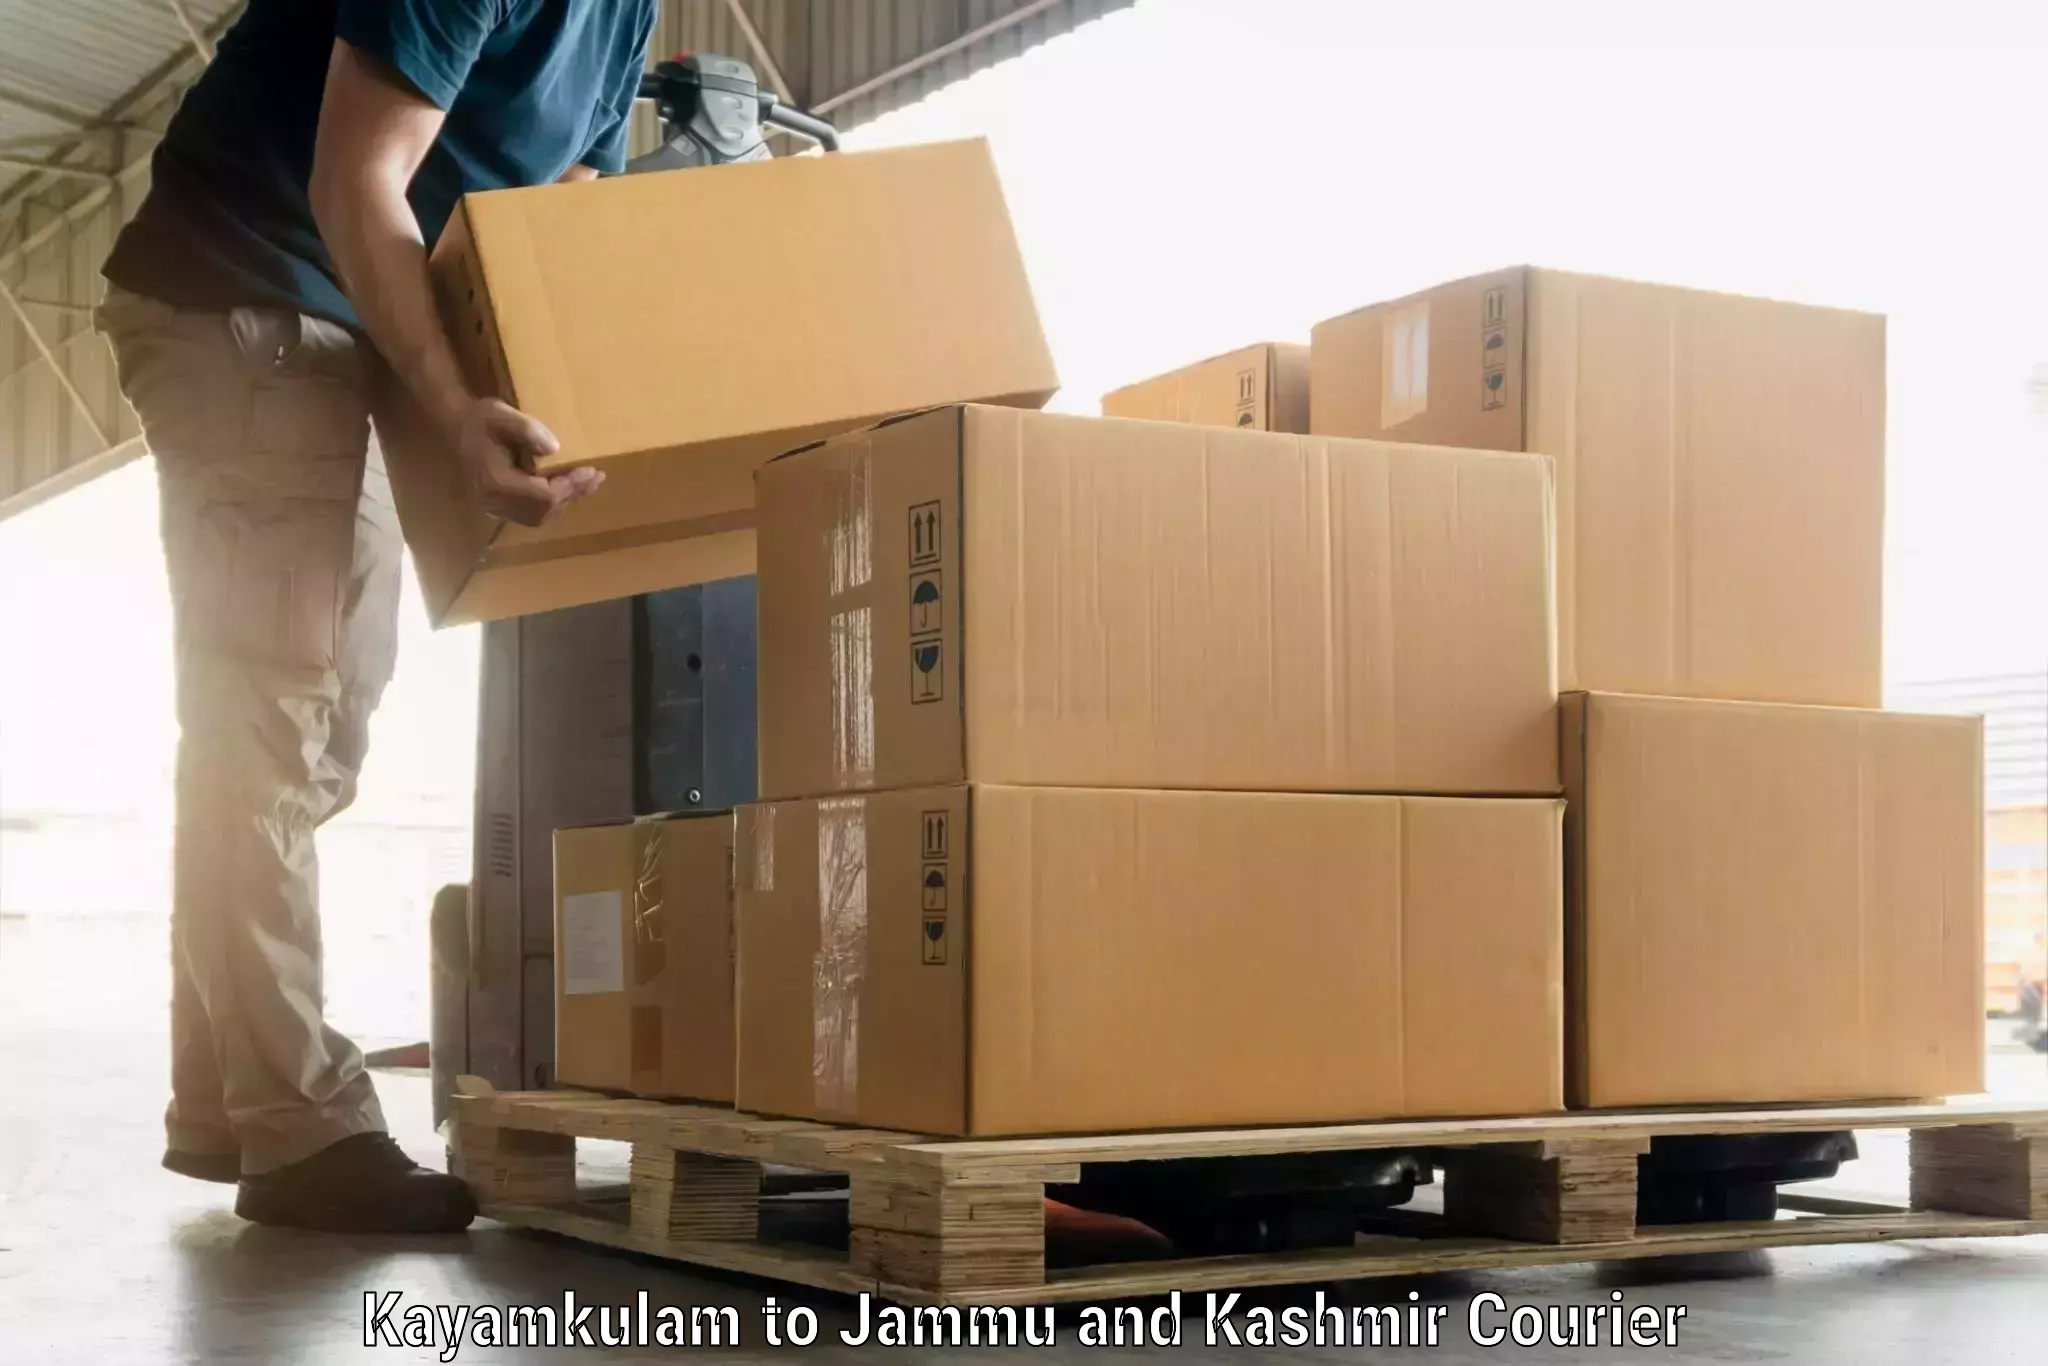 Fast track baggage delivery in Kayamkulam to Baramulla